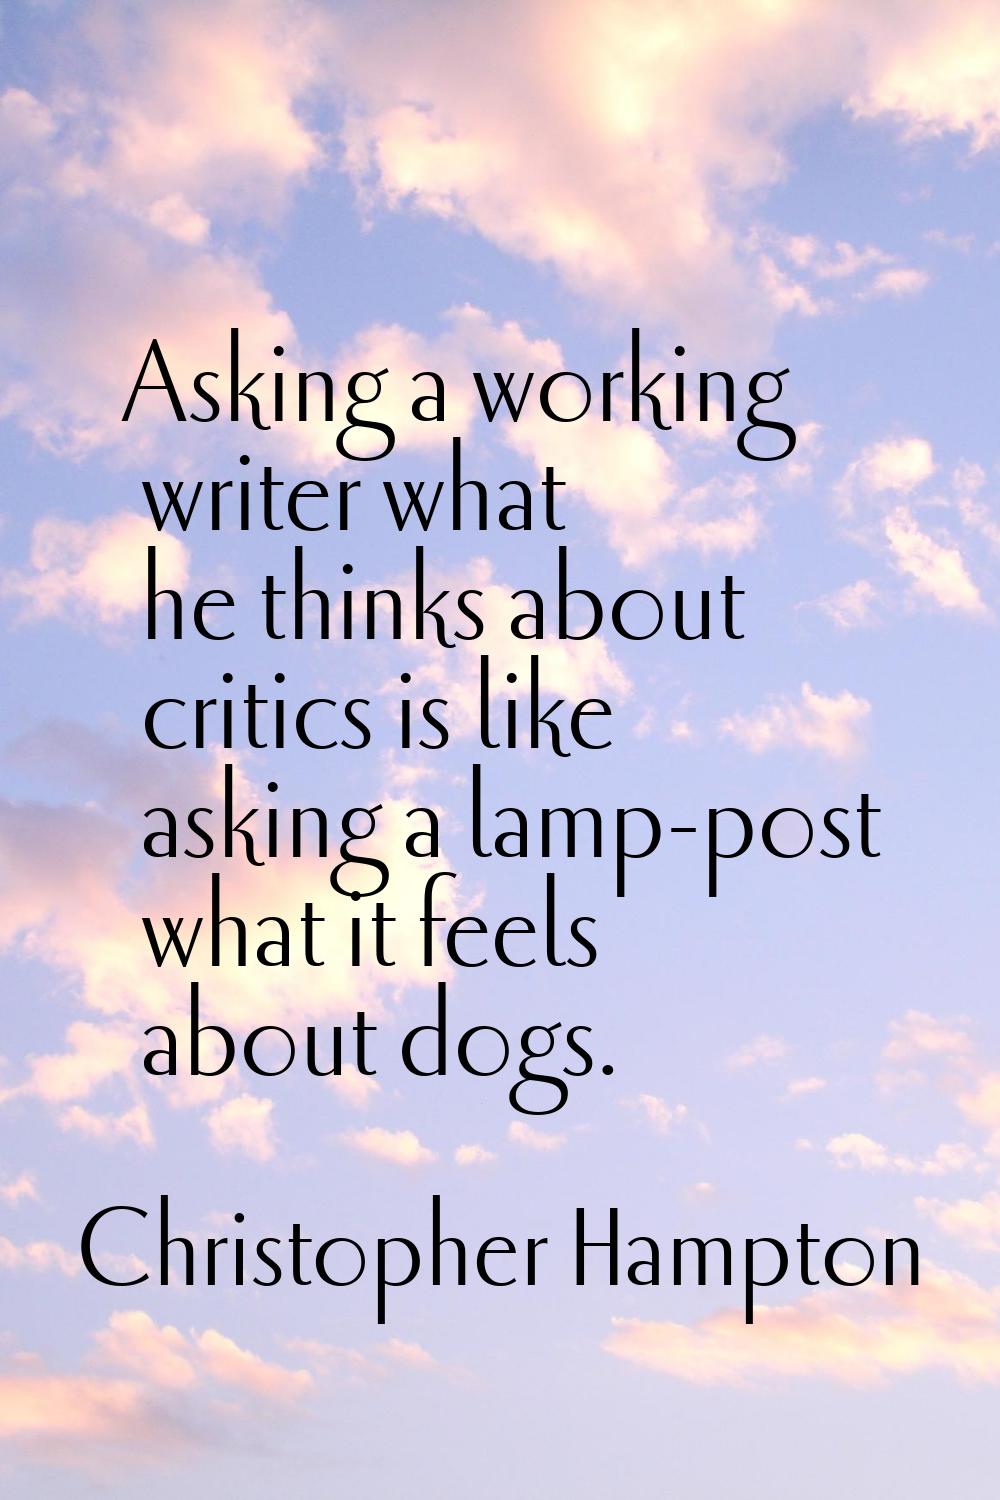 Asking a working writer what he thinks about critics is like asking a lamp-post what it feels about